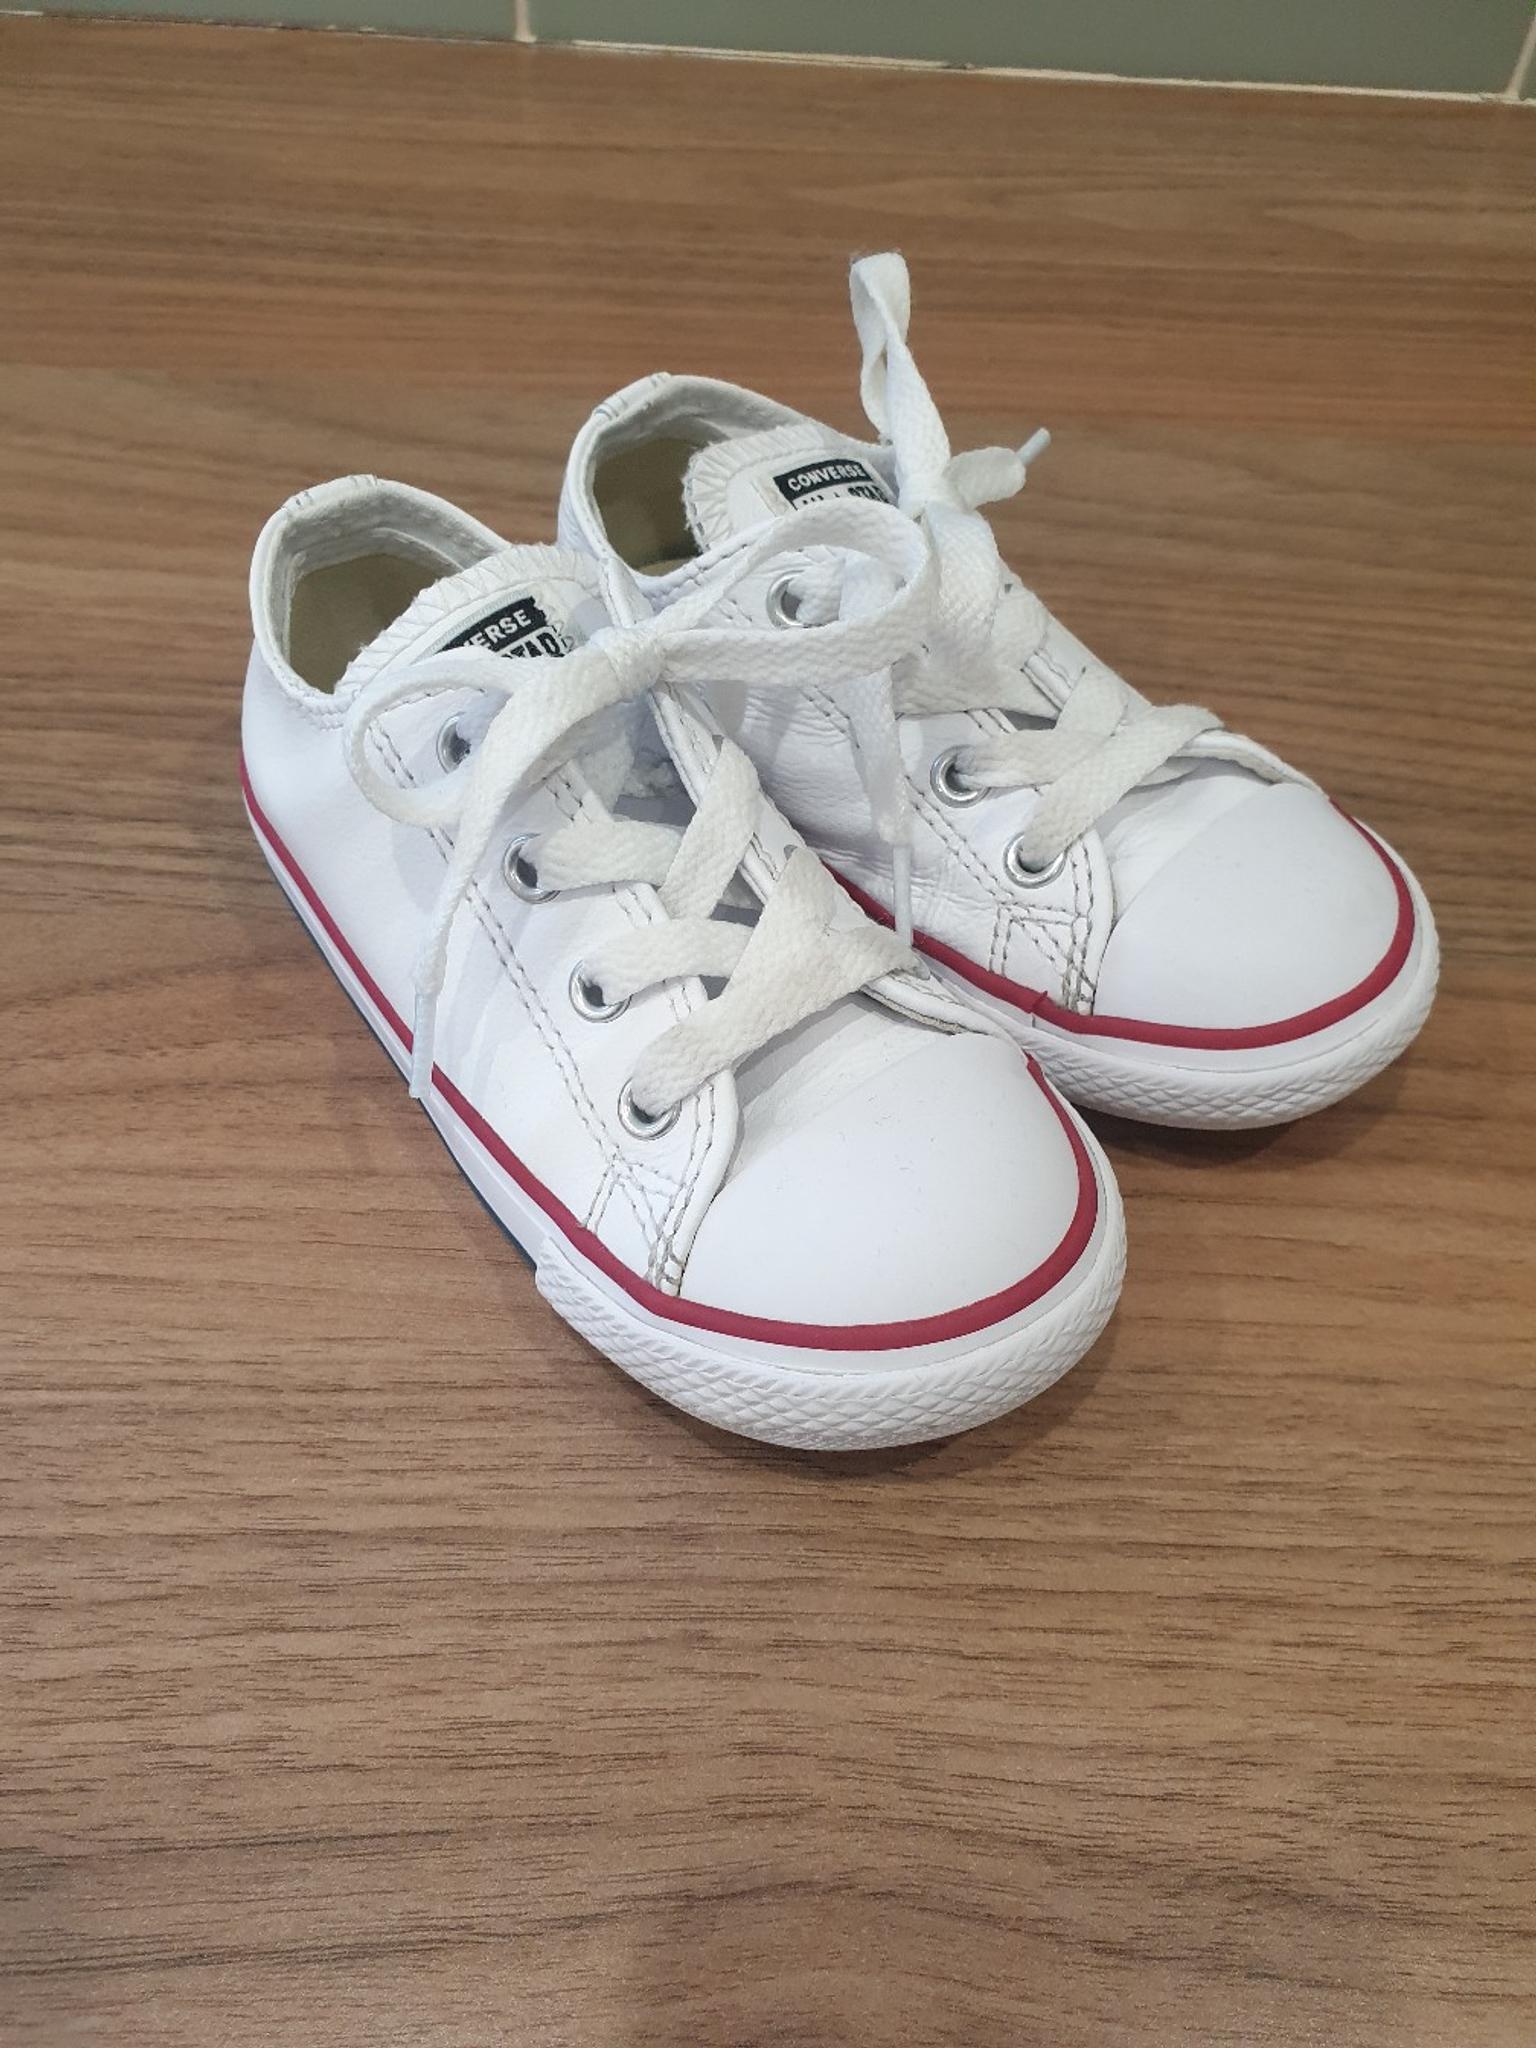 leather converse size 8